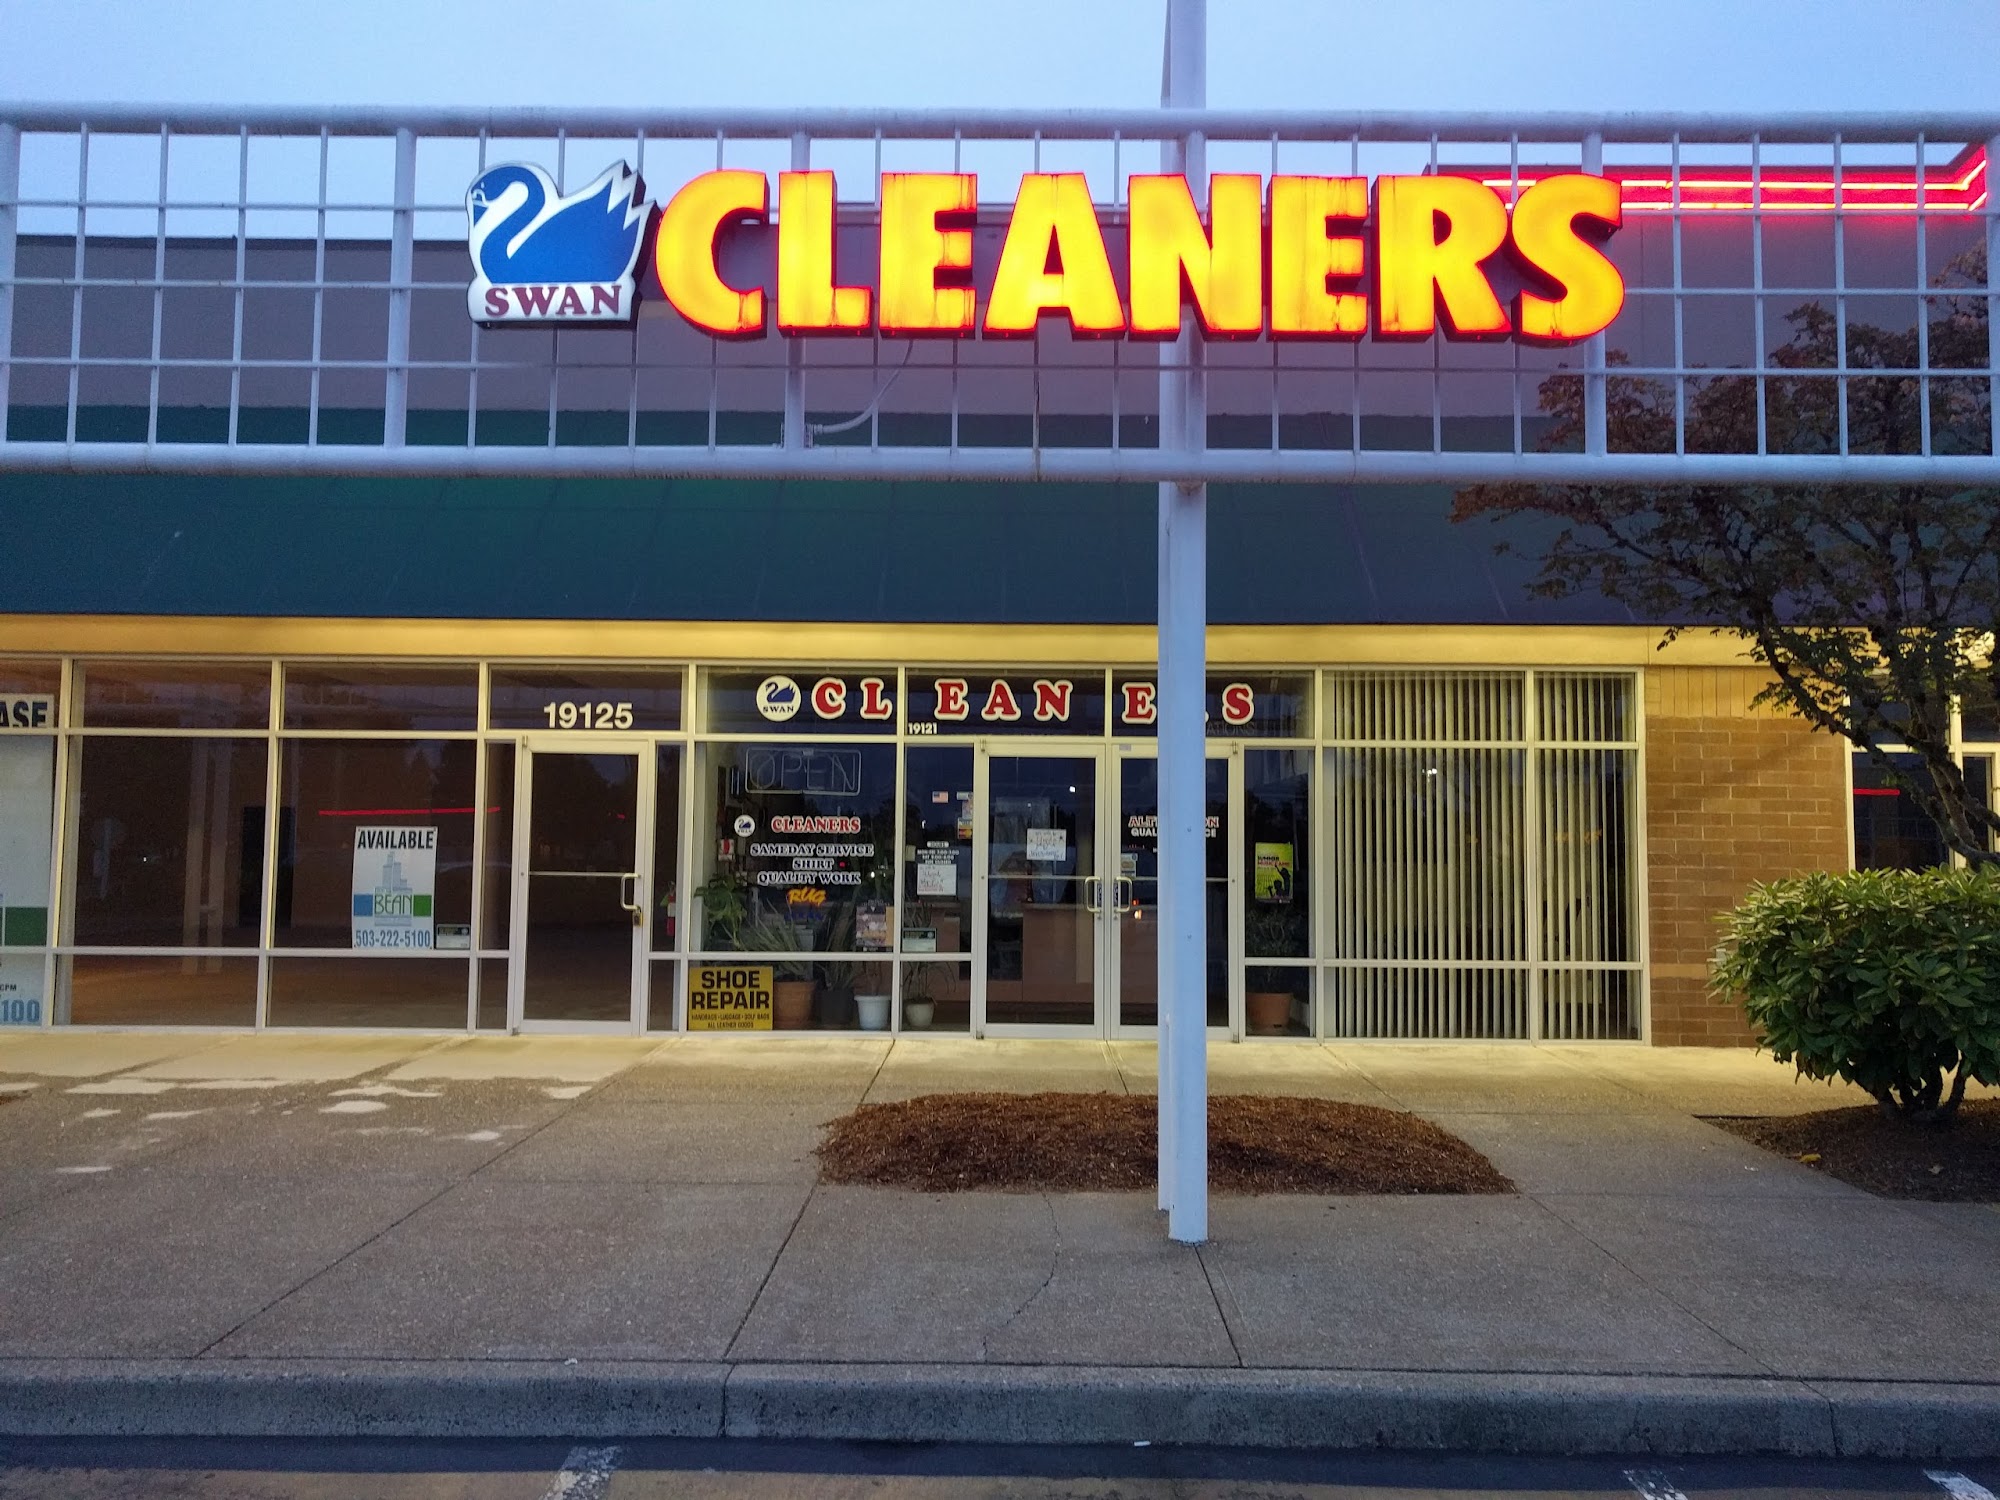 Swan Cleaners & Tailors